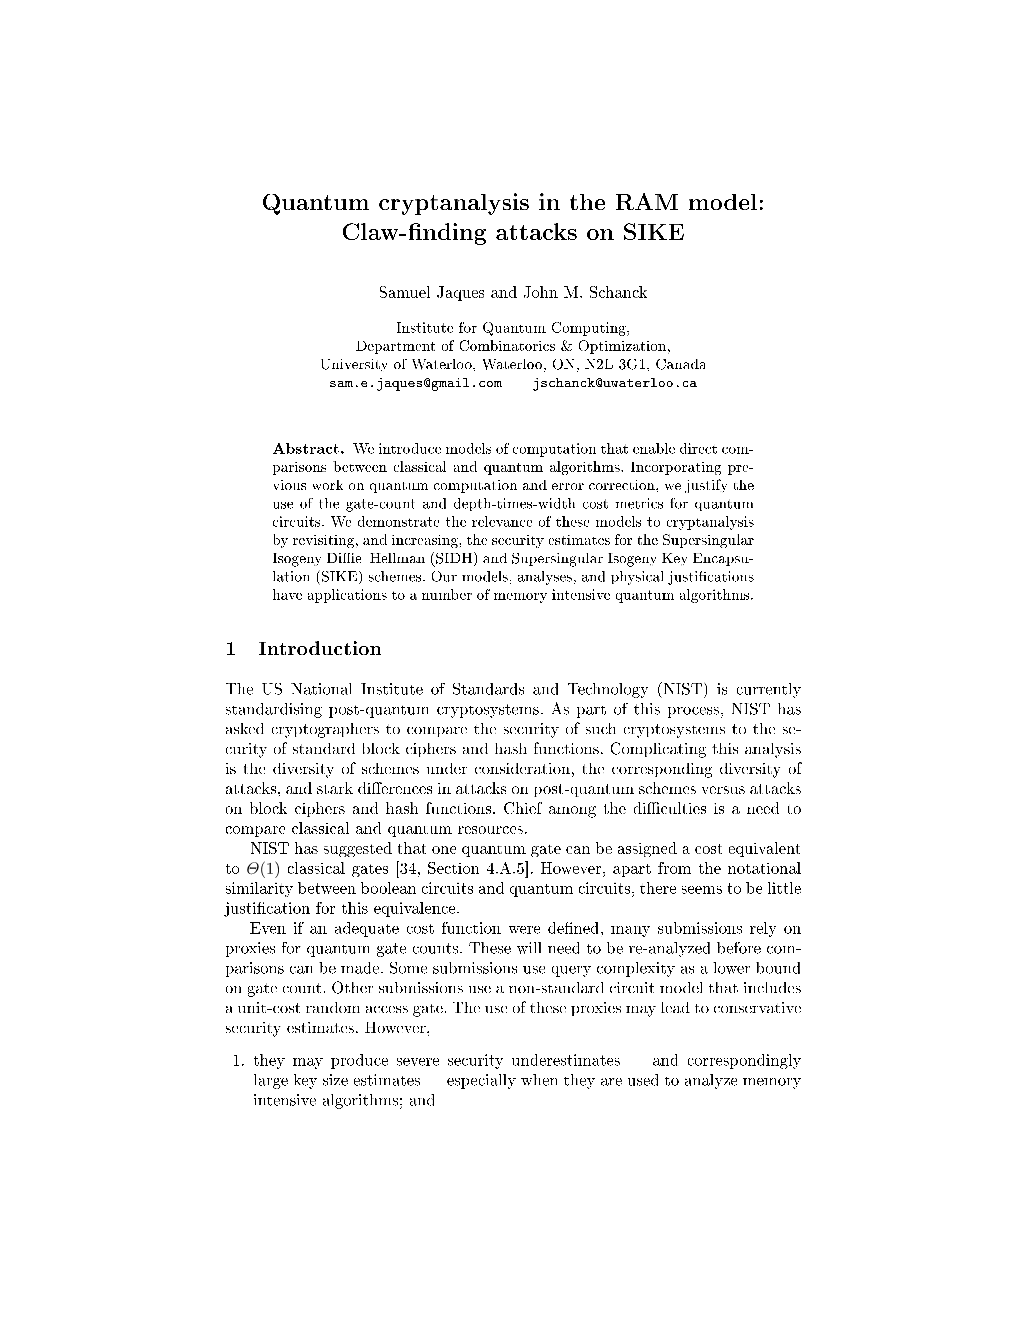 Quantum Cryptanalysis in the RAM Model: Claw-Finding Attacks on SIKE